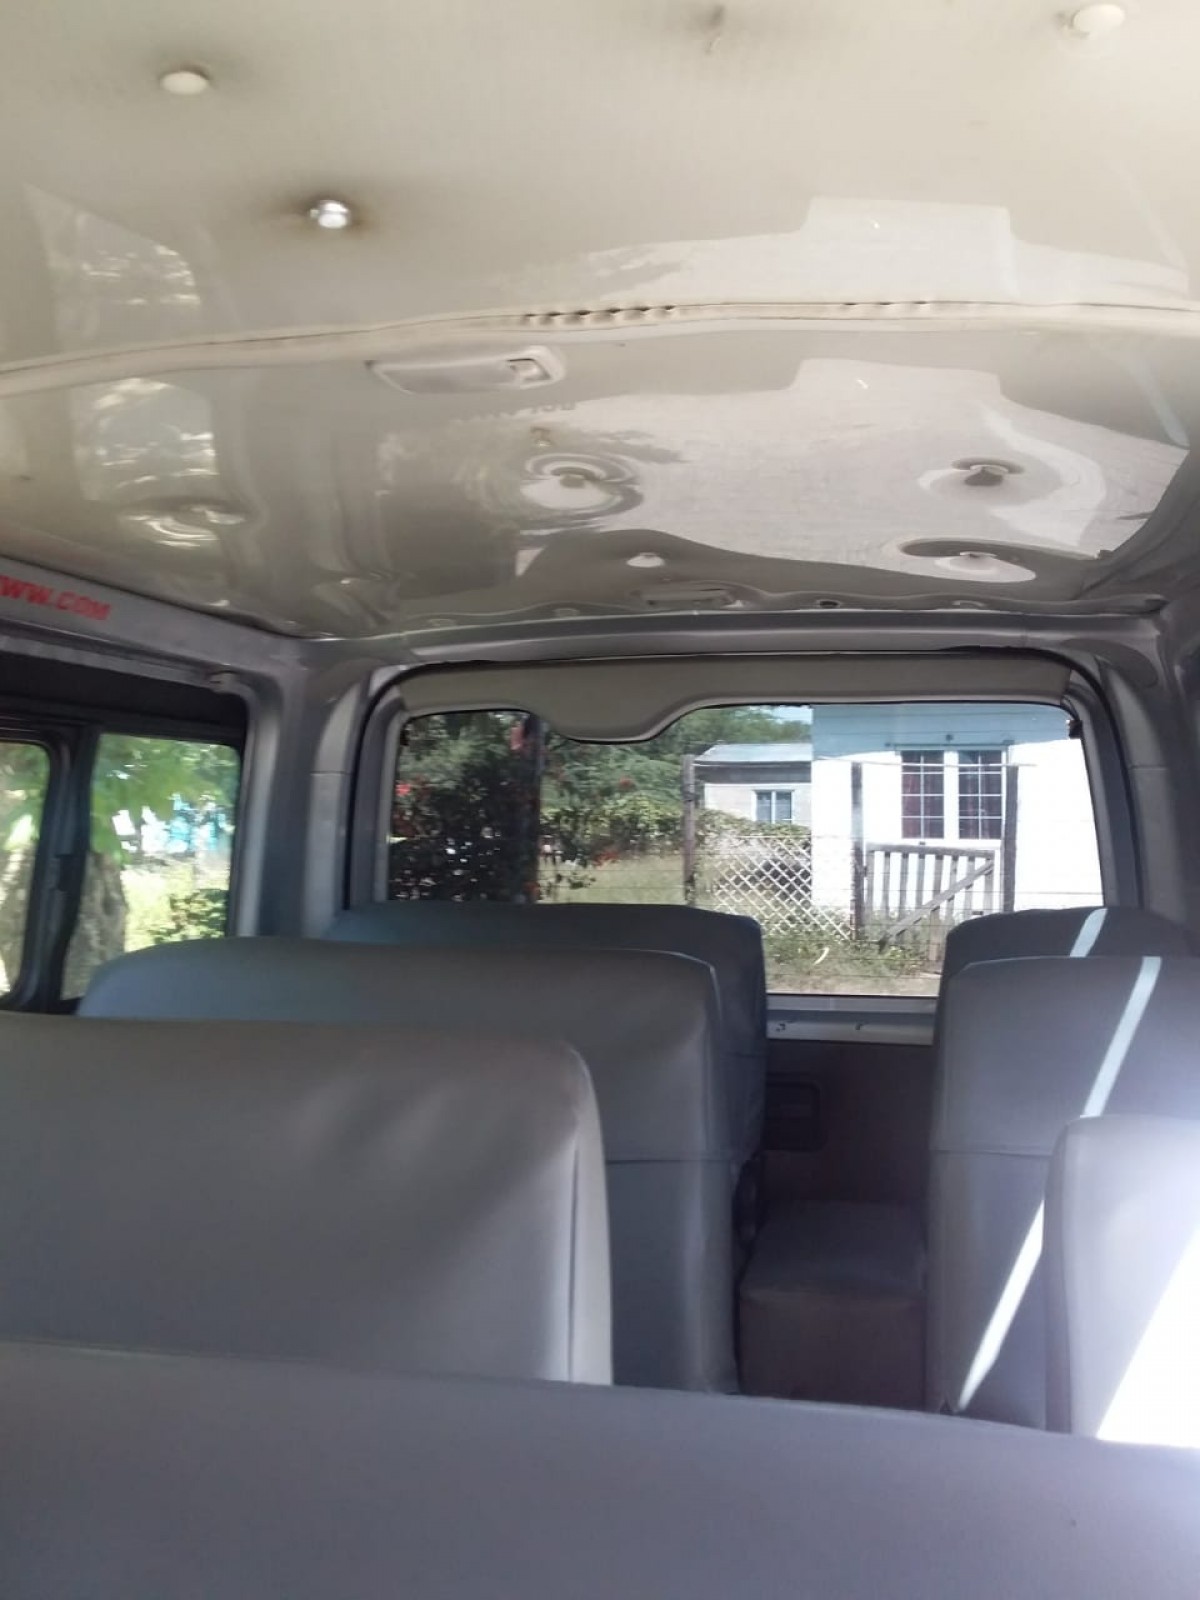 Toyota Jamaica Hiace Bus For Sale 2016 Tiger Maker May Pen Clarendon